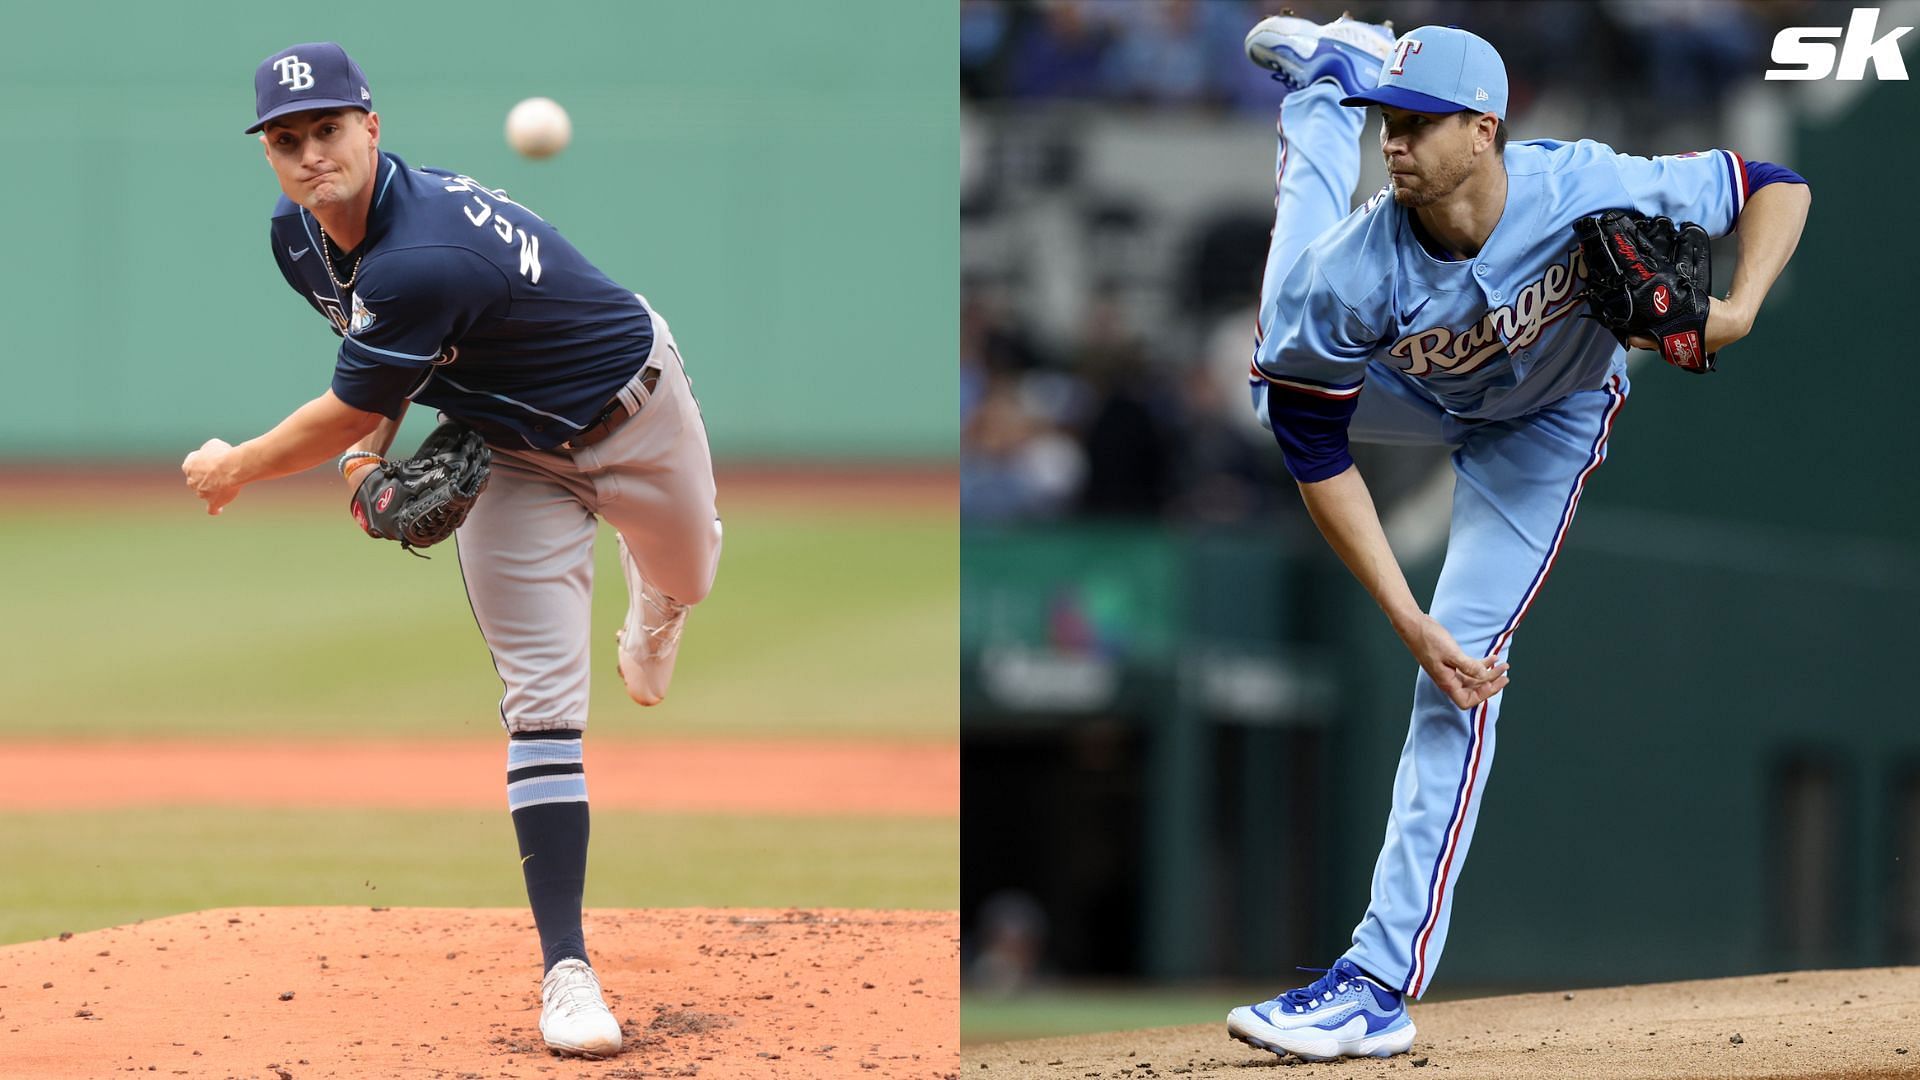 Shane McClanahan of the Tampa Bay Rays and Jacob deGrom of the Texas Rangers